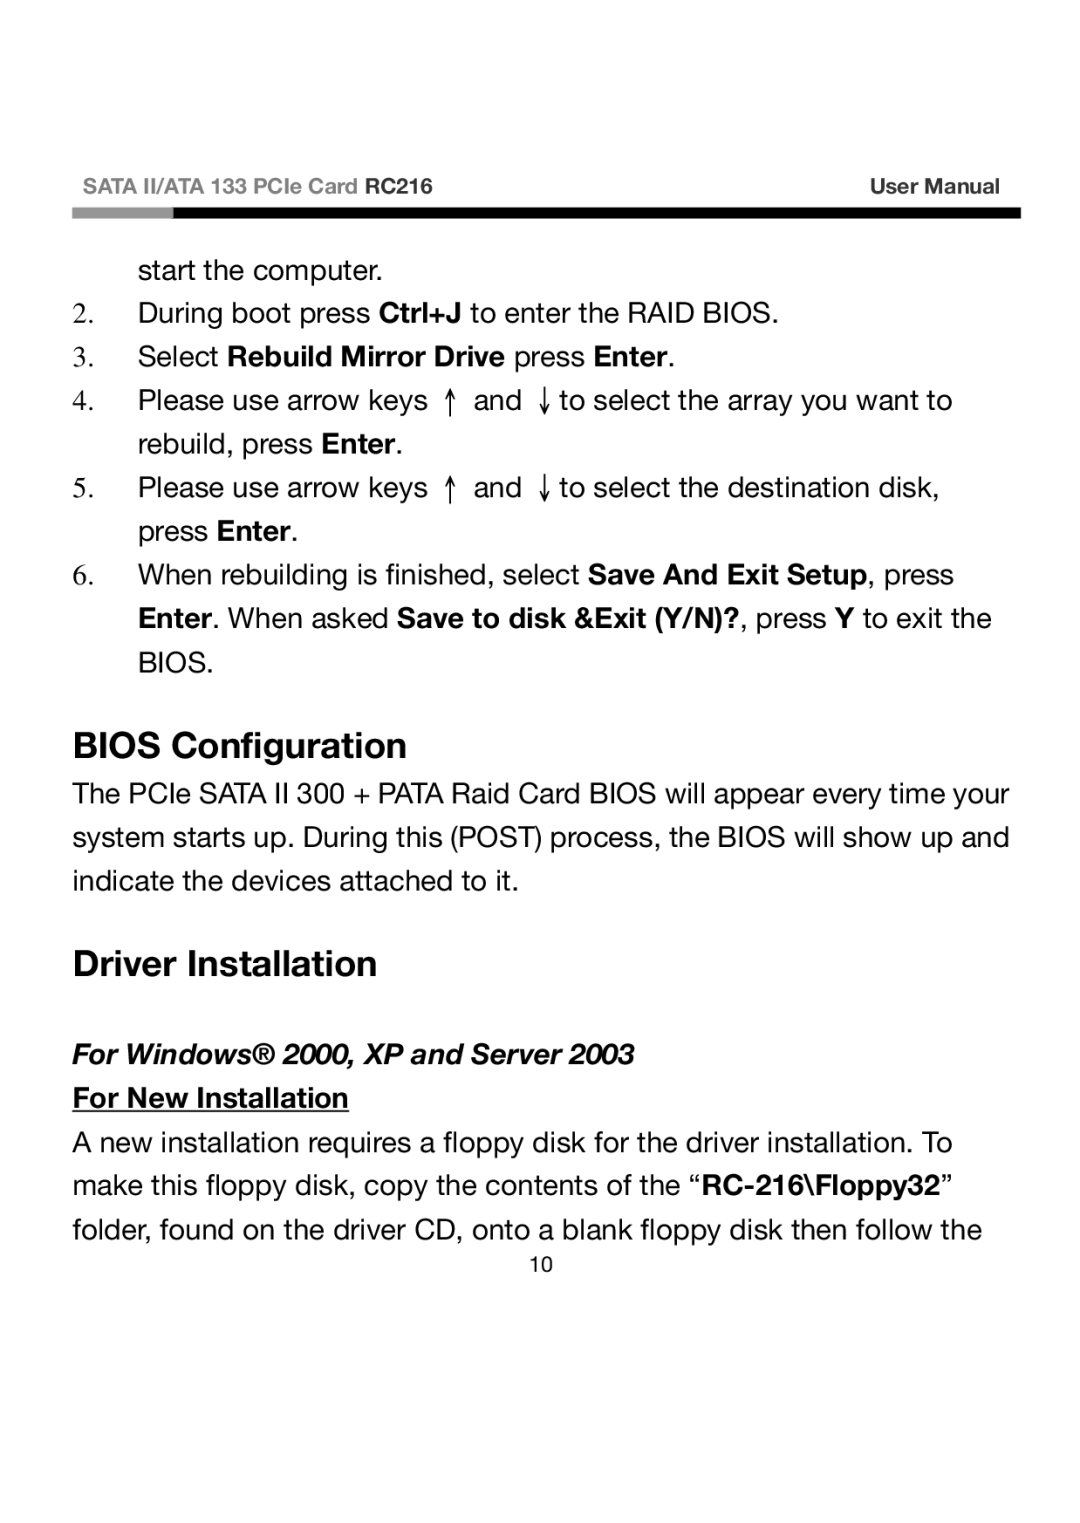 Rosewill RC216 user manual Bios Configuration, Driver Installation, For Windows 2000, XP and Server 